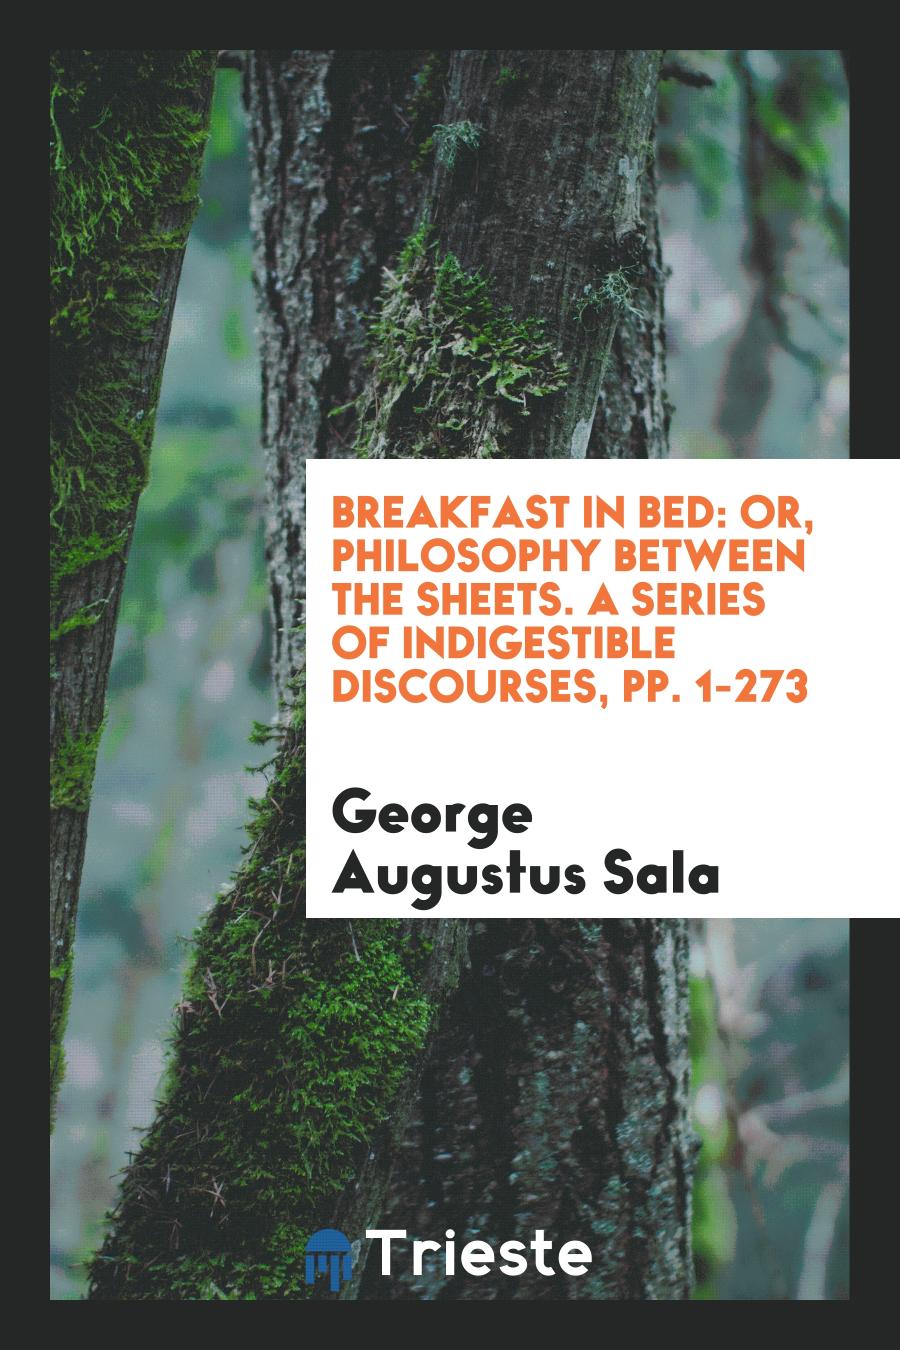 Breakfast in Bed: Or, Philosophy Between the Sheets. A Series of Indigestible Discourses, pp. 1-273